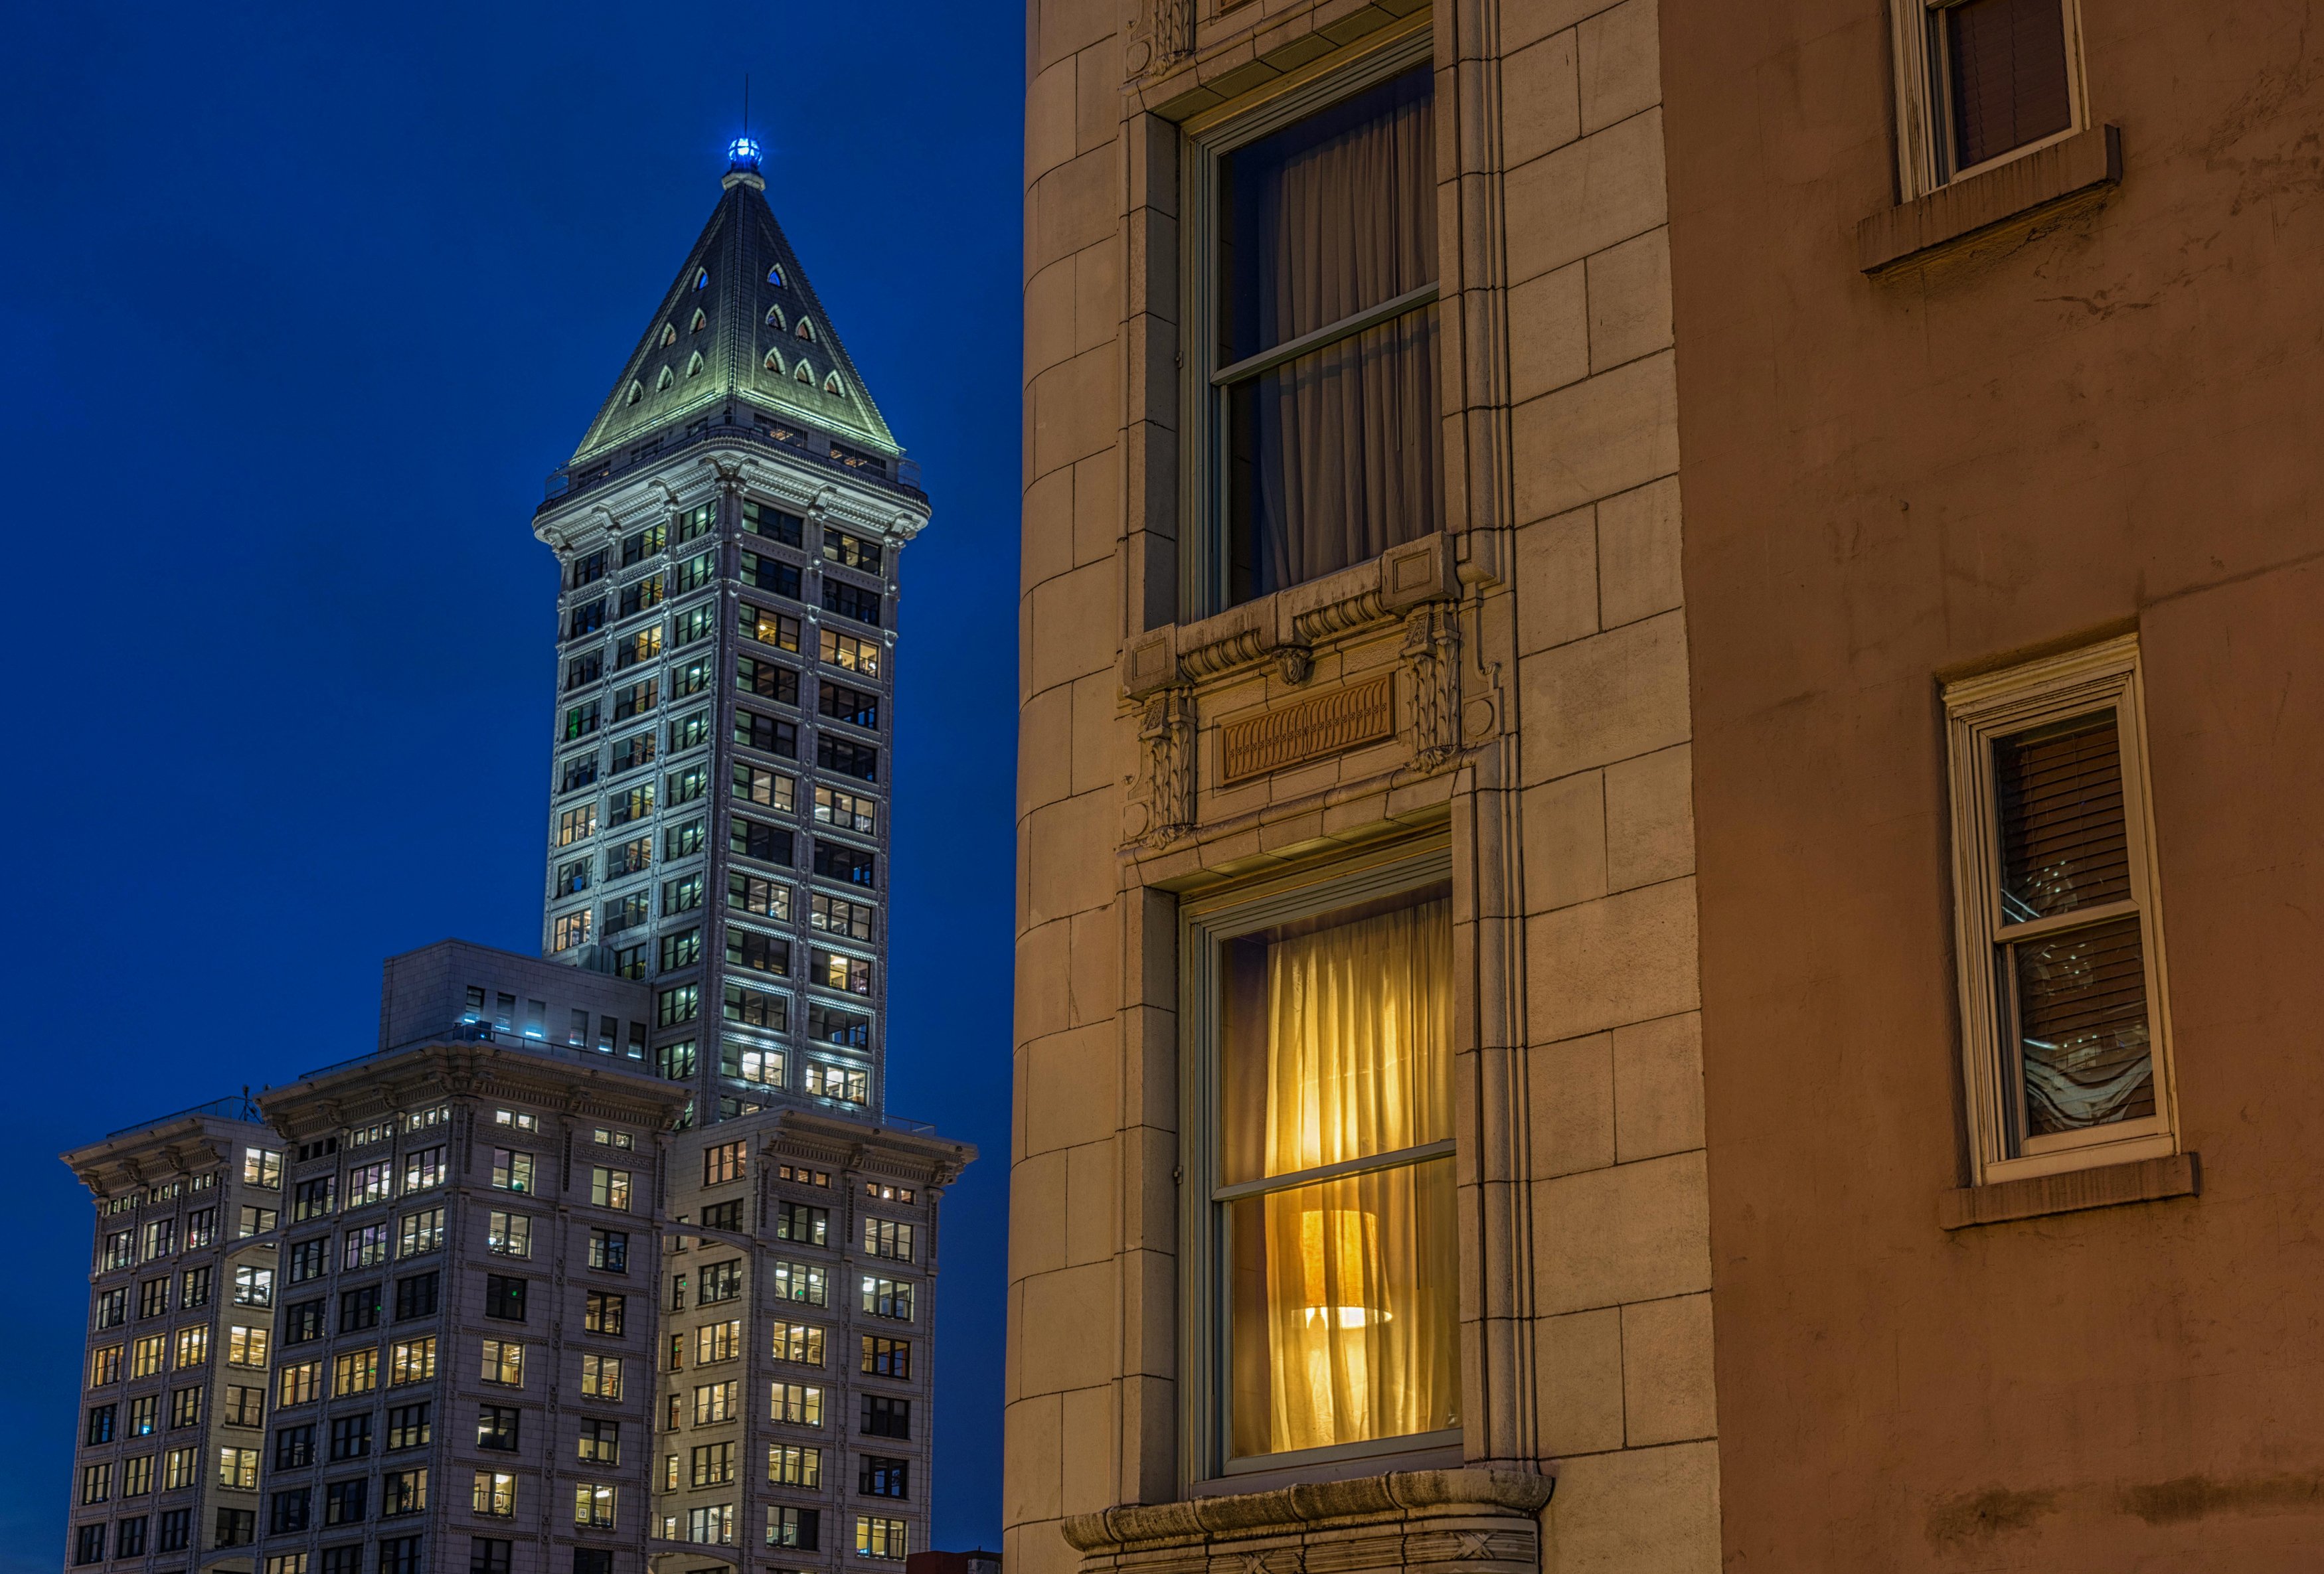 One of the locations on our adults-only ghost tour in Seattle.